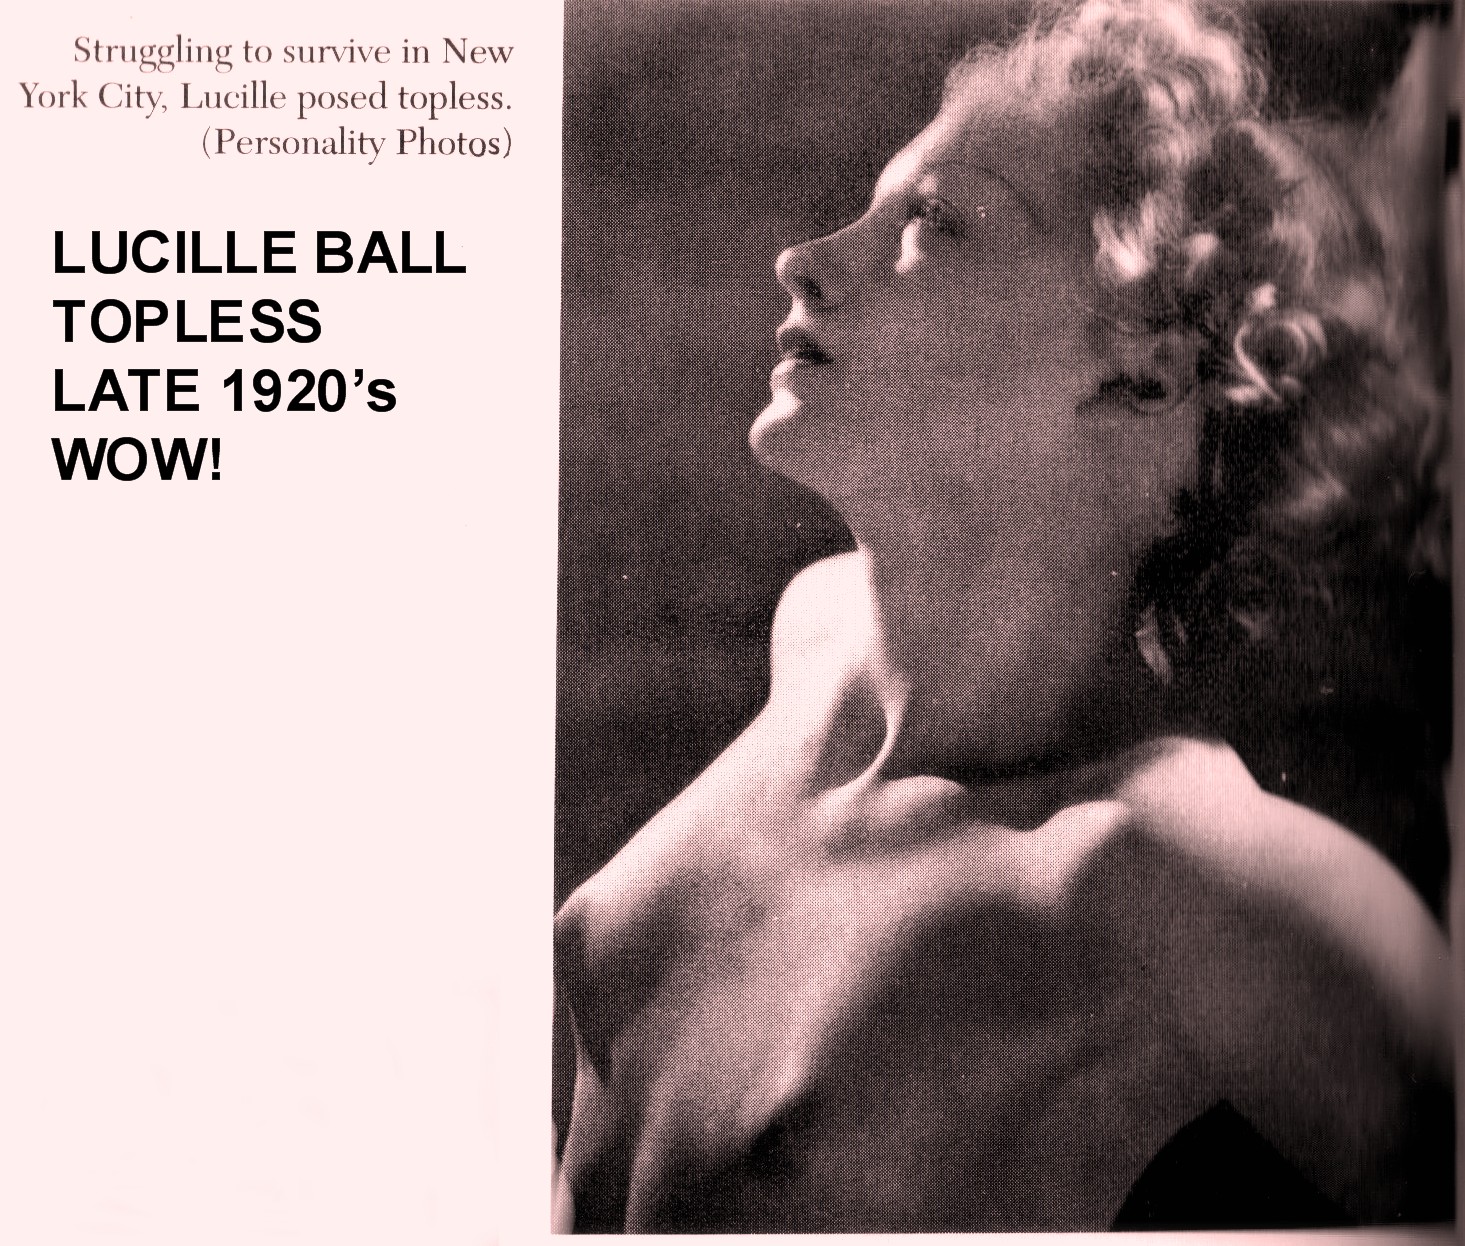 Lucille ball big nipples